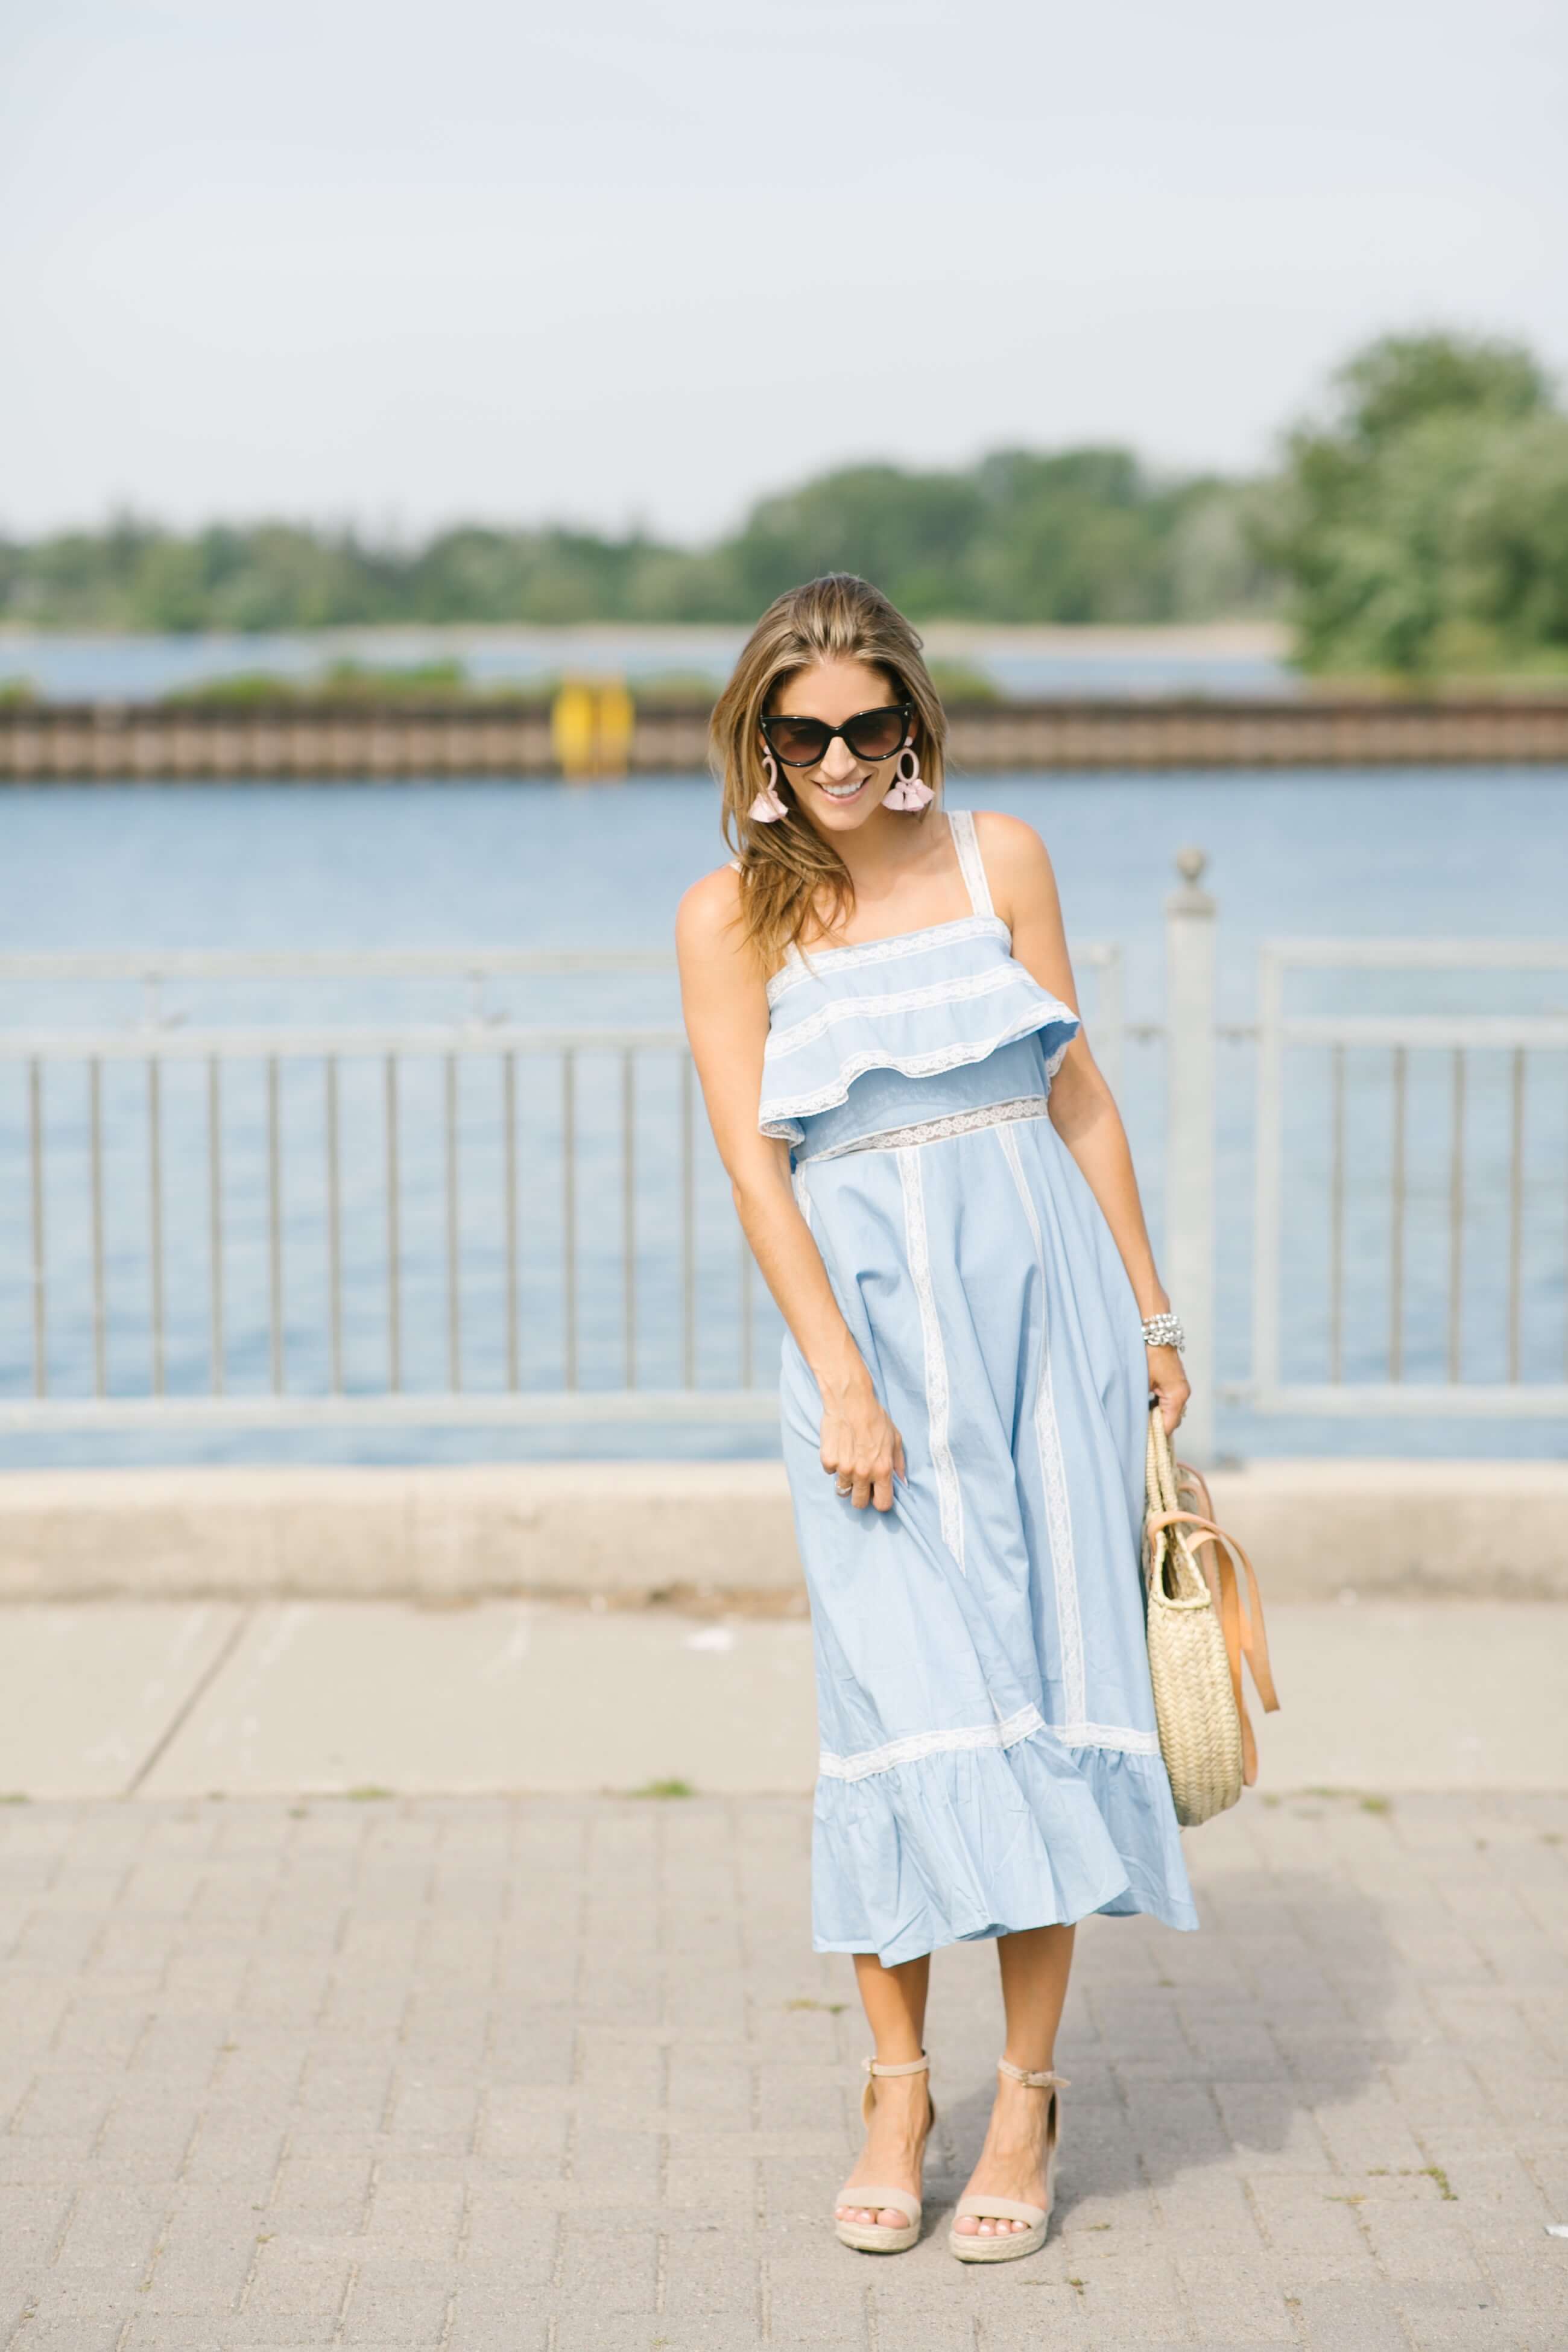 Summer wedding outfit ideas - ruffle maxi dress, round straw bag and espadrilles Mandy Furnis sparkleshinylove